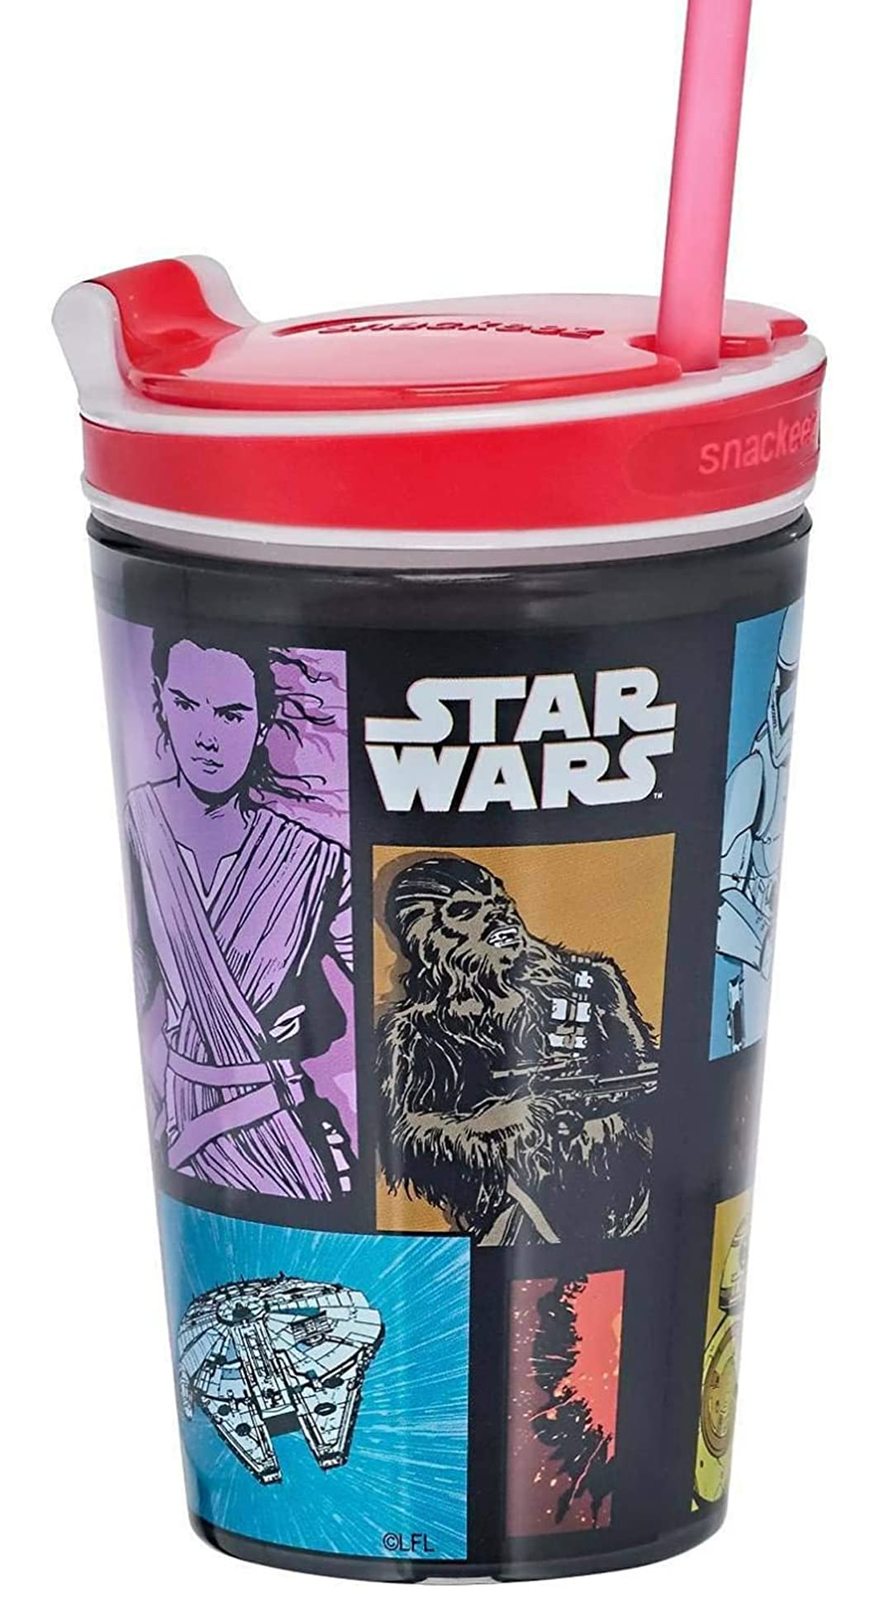 Primary image for Snackeez Jr - 2-in-1 Snack & Drink Cup Star Wars 7 Movie Edition (STORMTROOPER) 